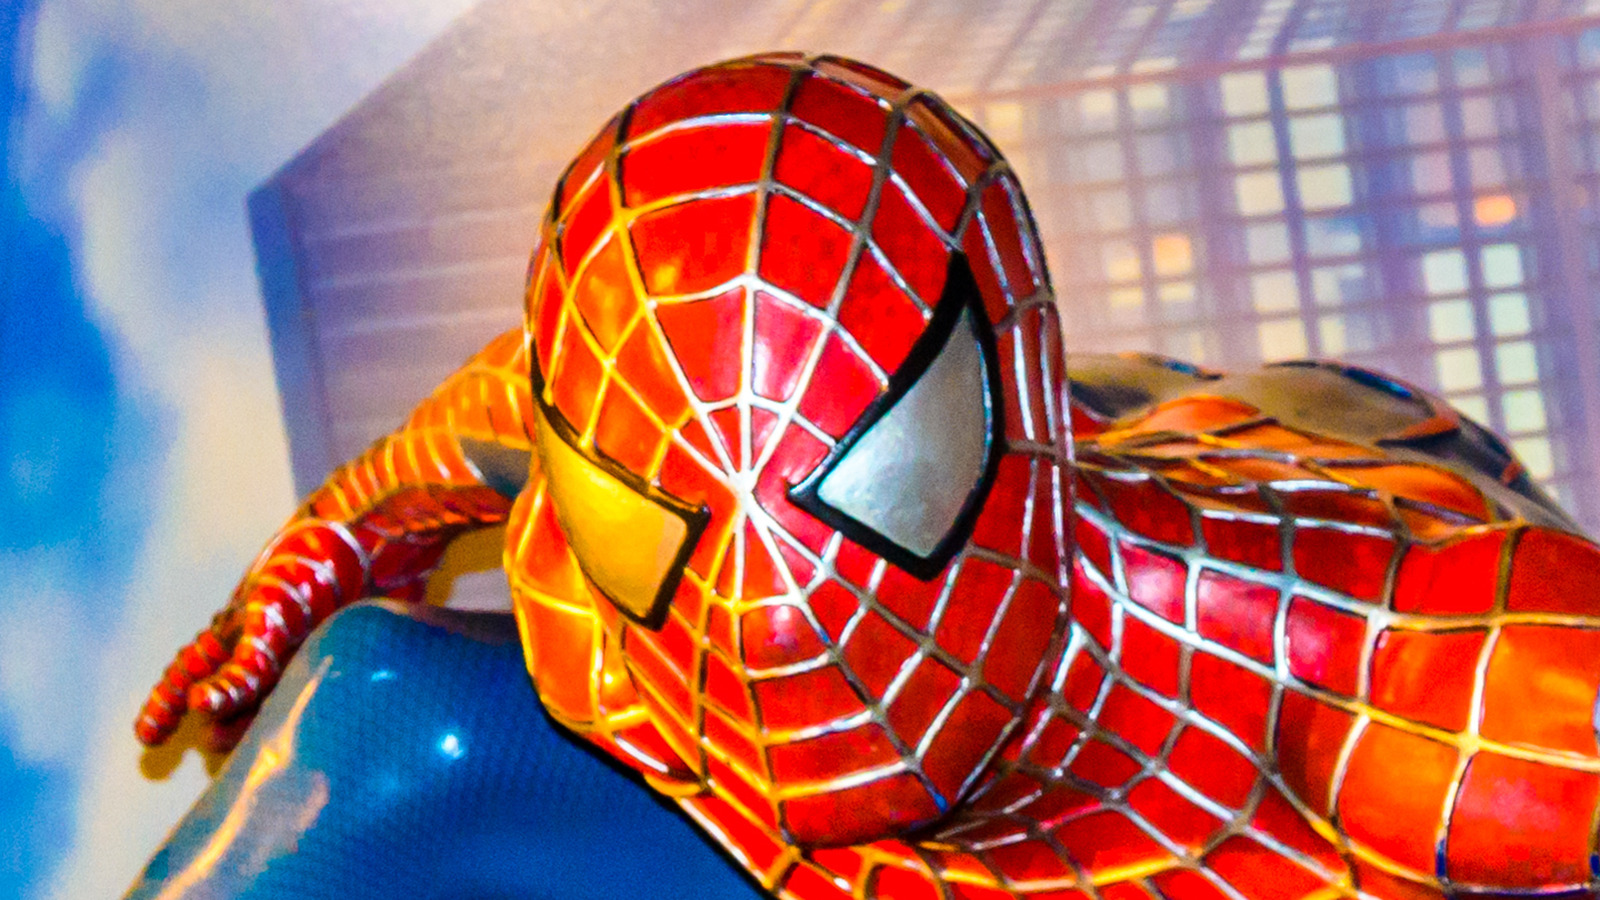 Andrew Garfield recited Tobey Maguire's lines while stoned